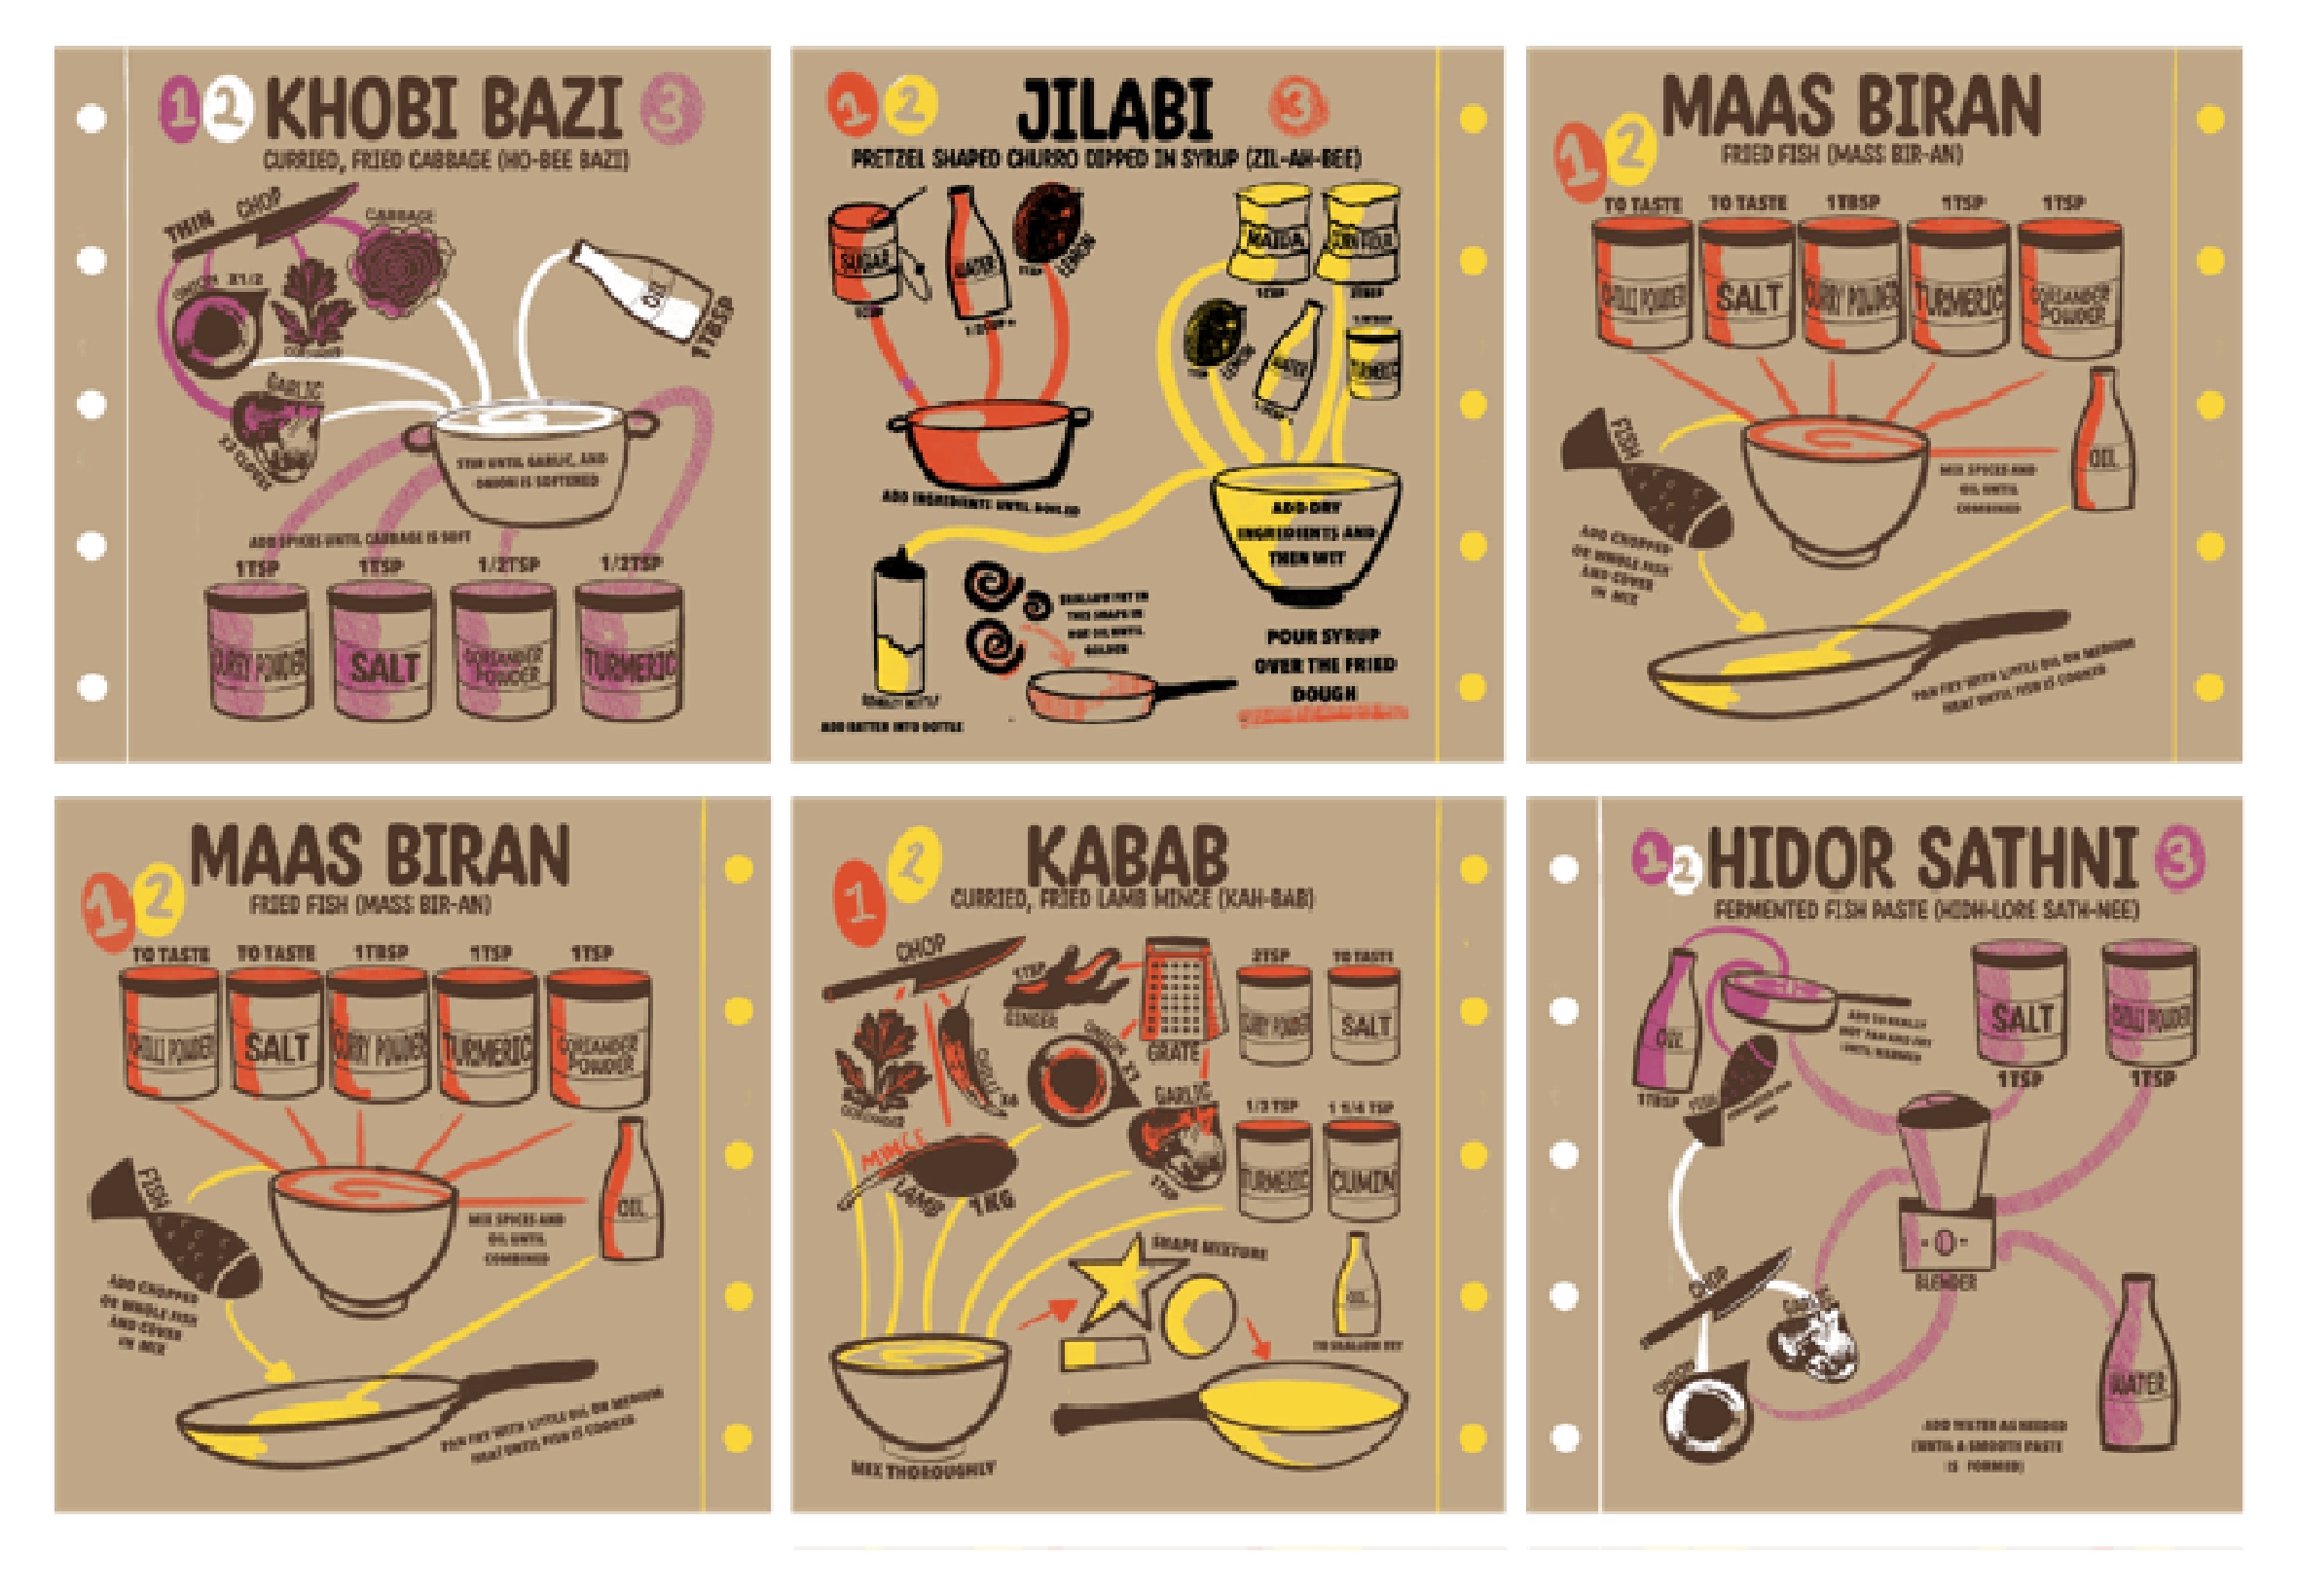 Illustrated pages of image Dominant Recipes, created to be simple and easily communicated using mixed media.